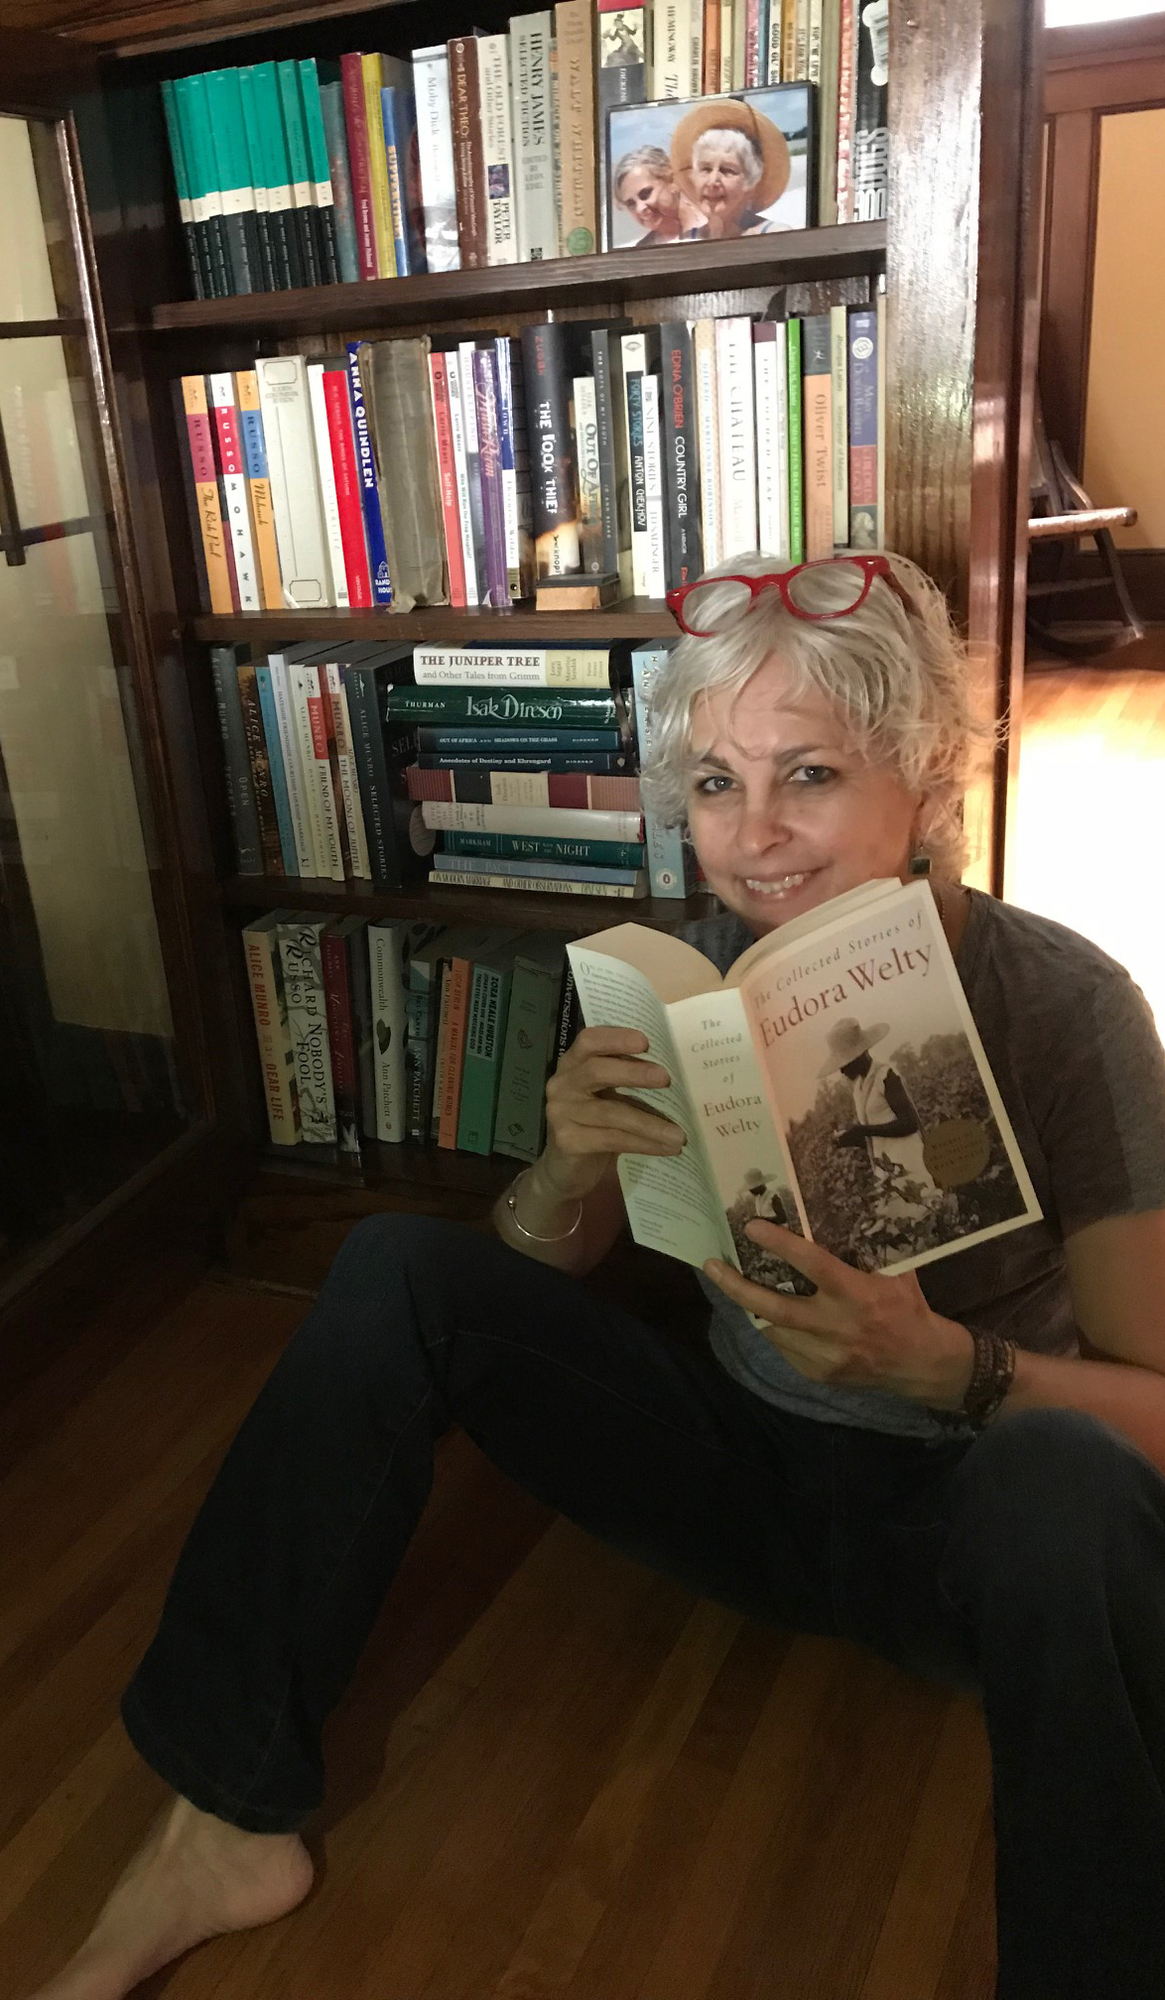 Kate DiCamillo and one of her many bookcases.